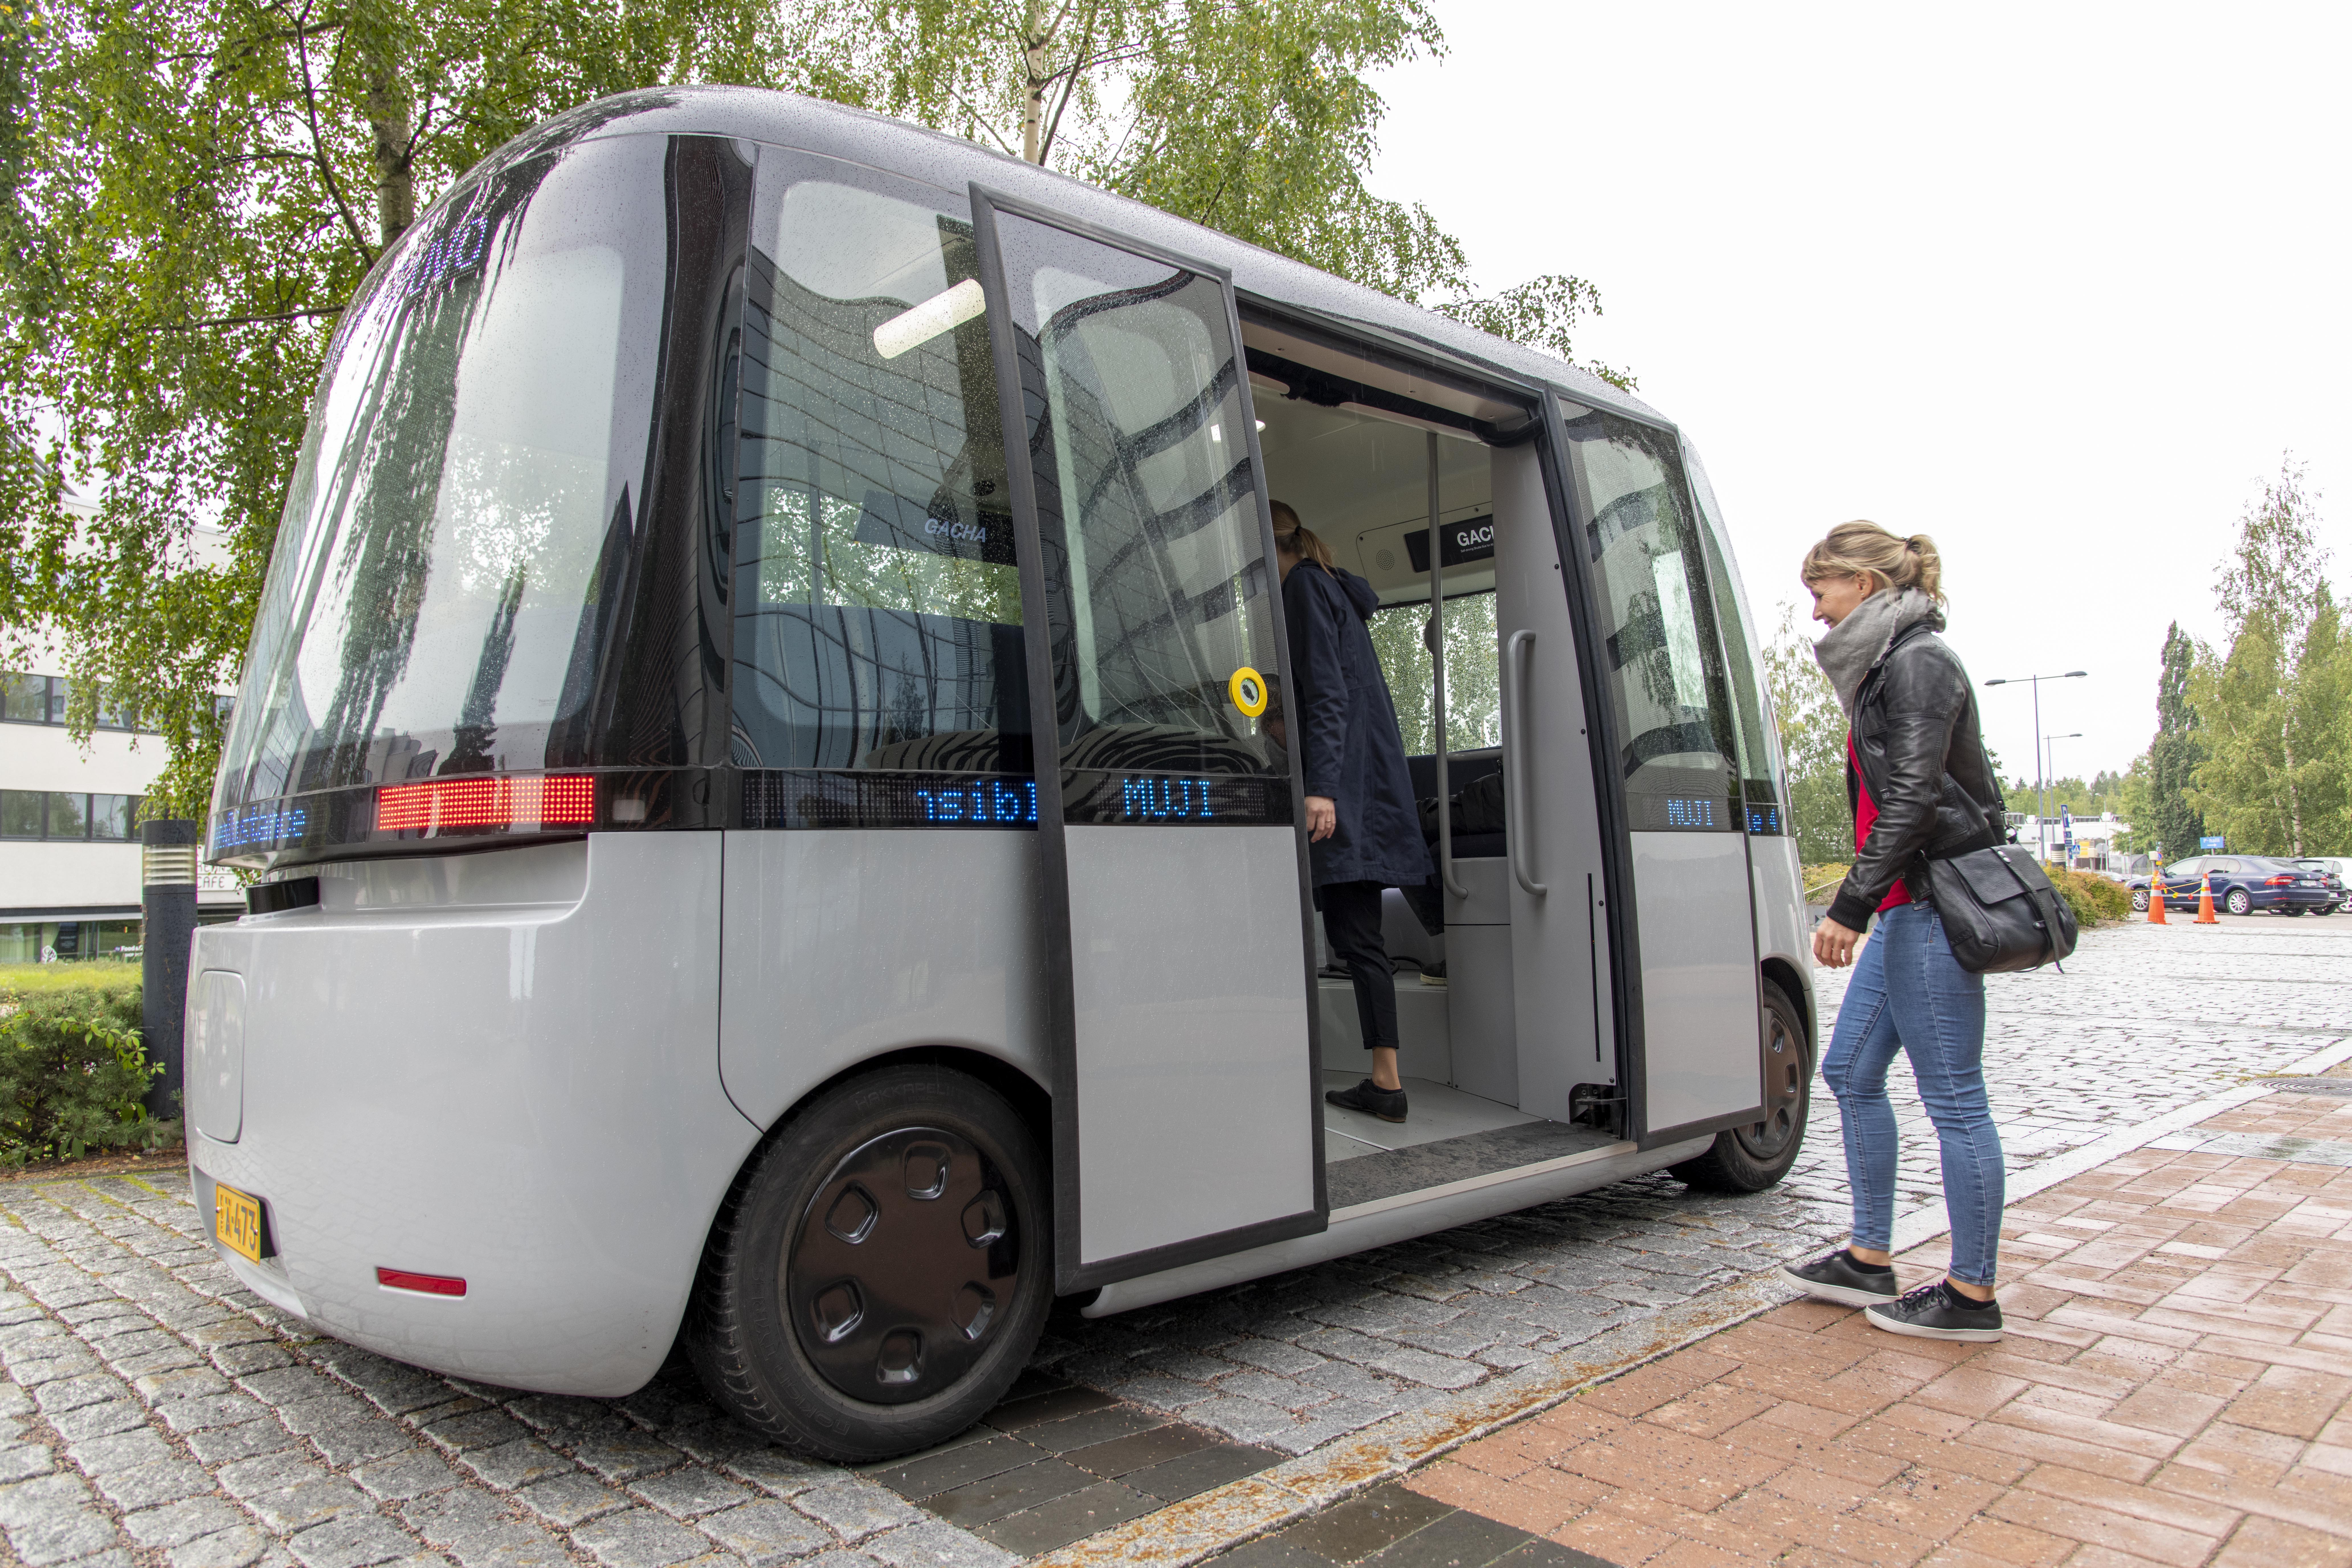 Espoo’s GACHA autonomous bus is being tested with the help of a pilot 5G network. Image credit – Janne Ketola